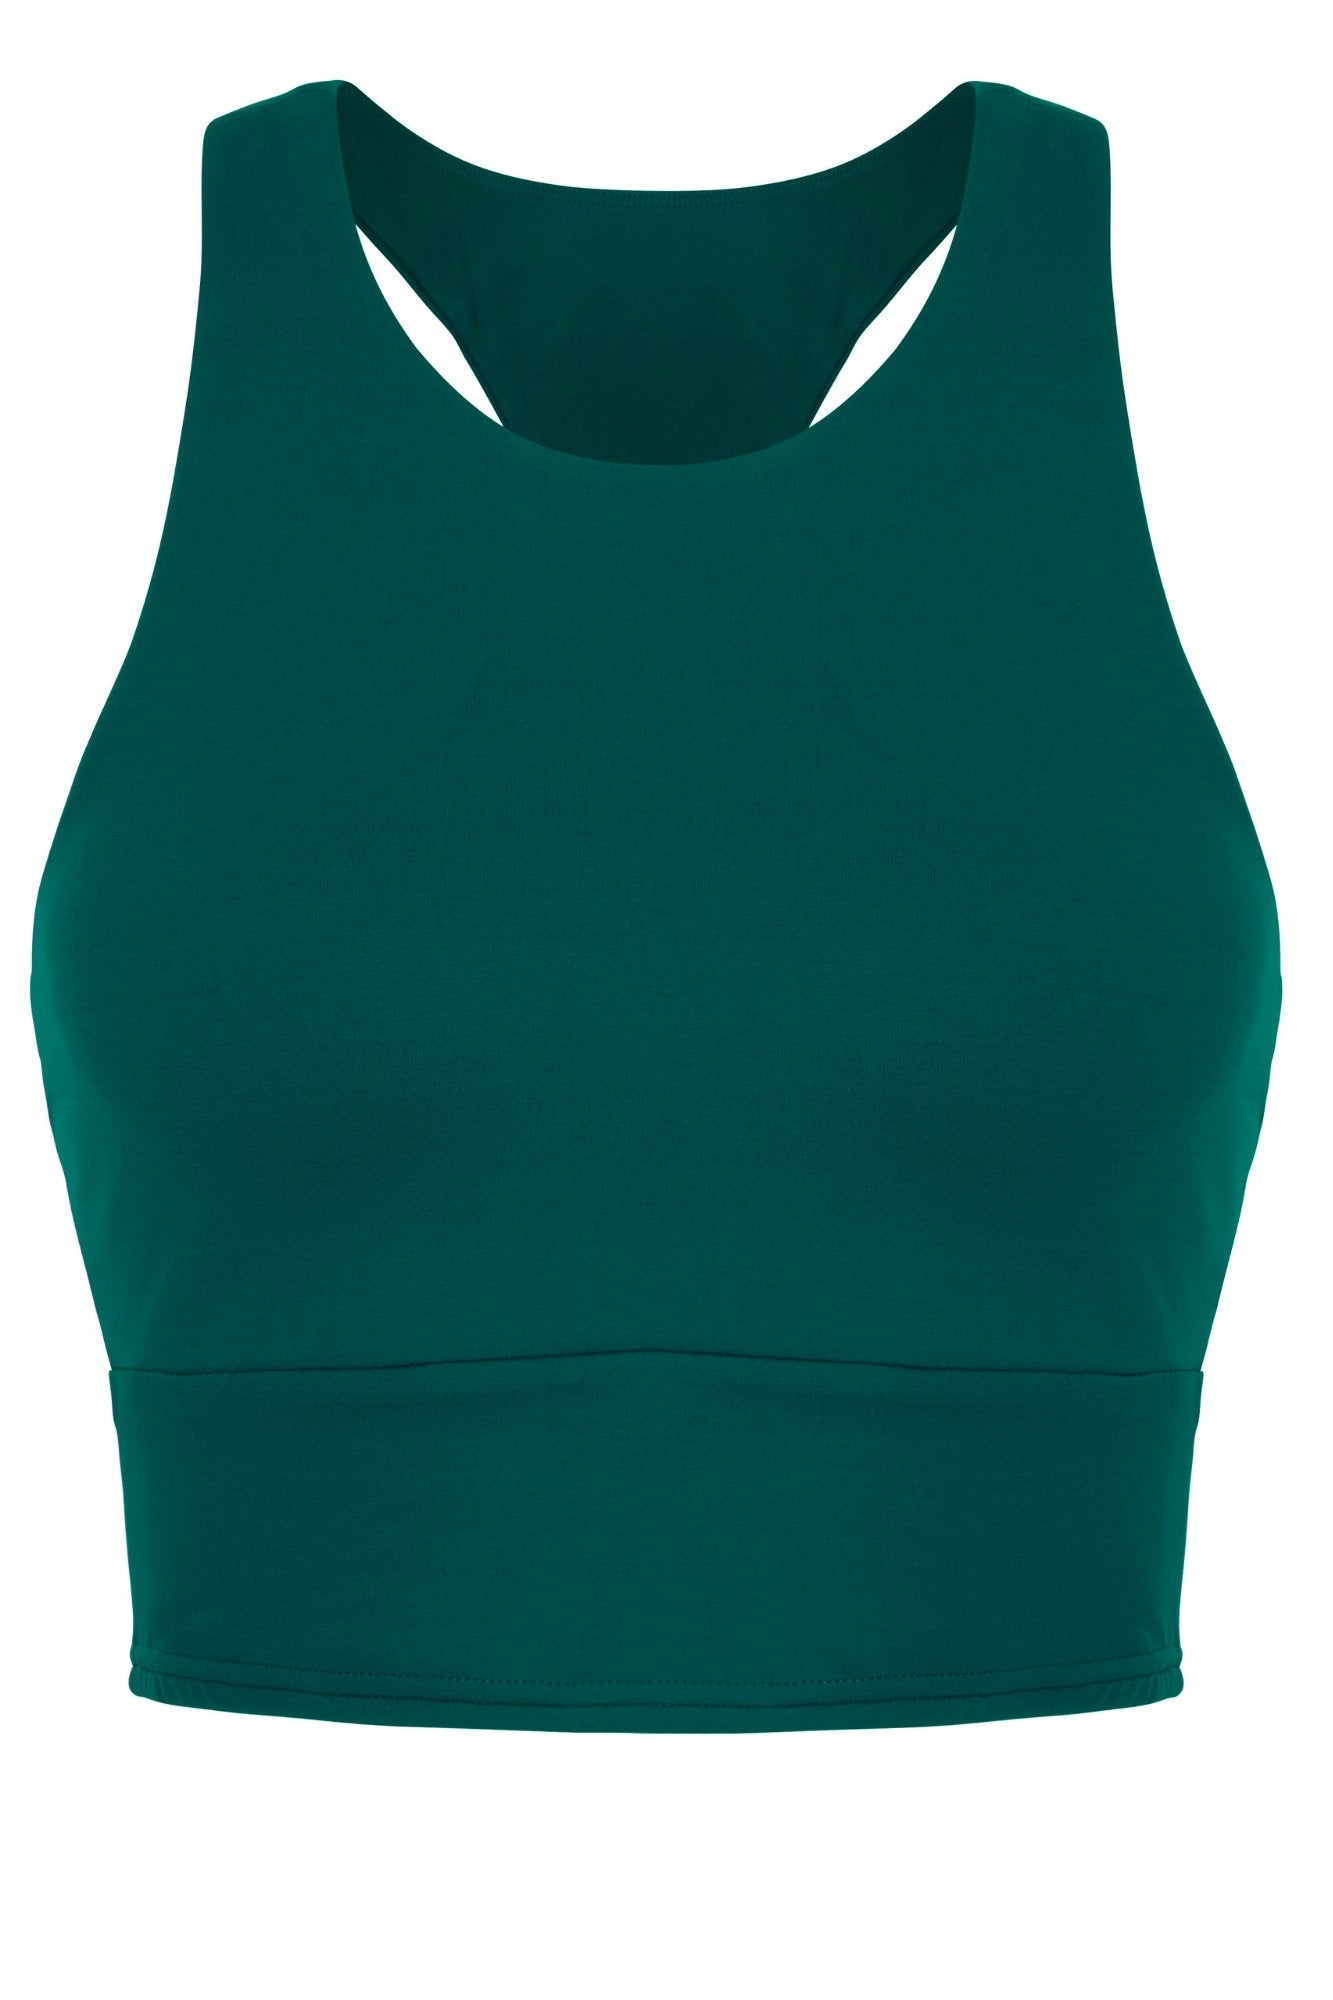 Teal Crop Bra Perfect for the Gym and Yoga by Born Nouli